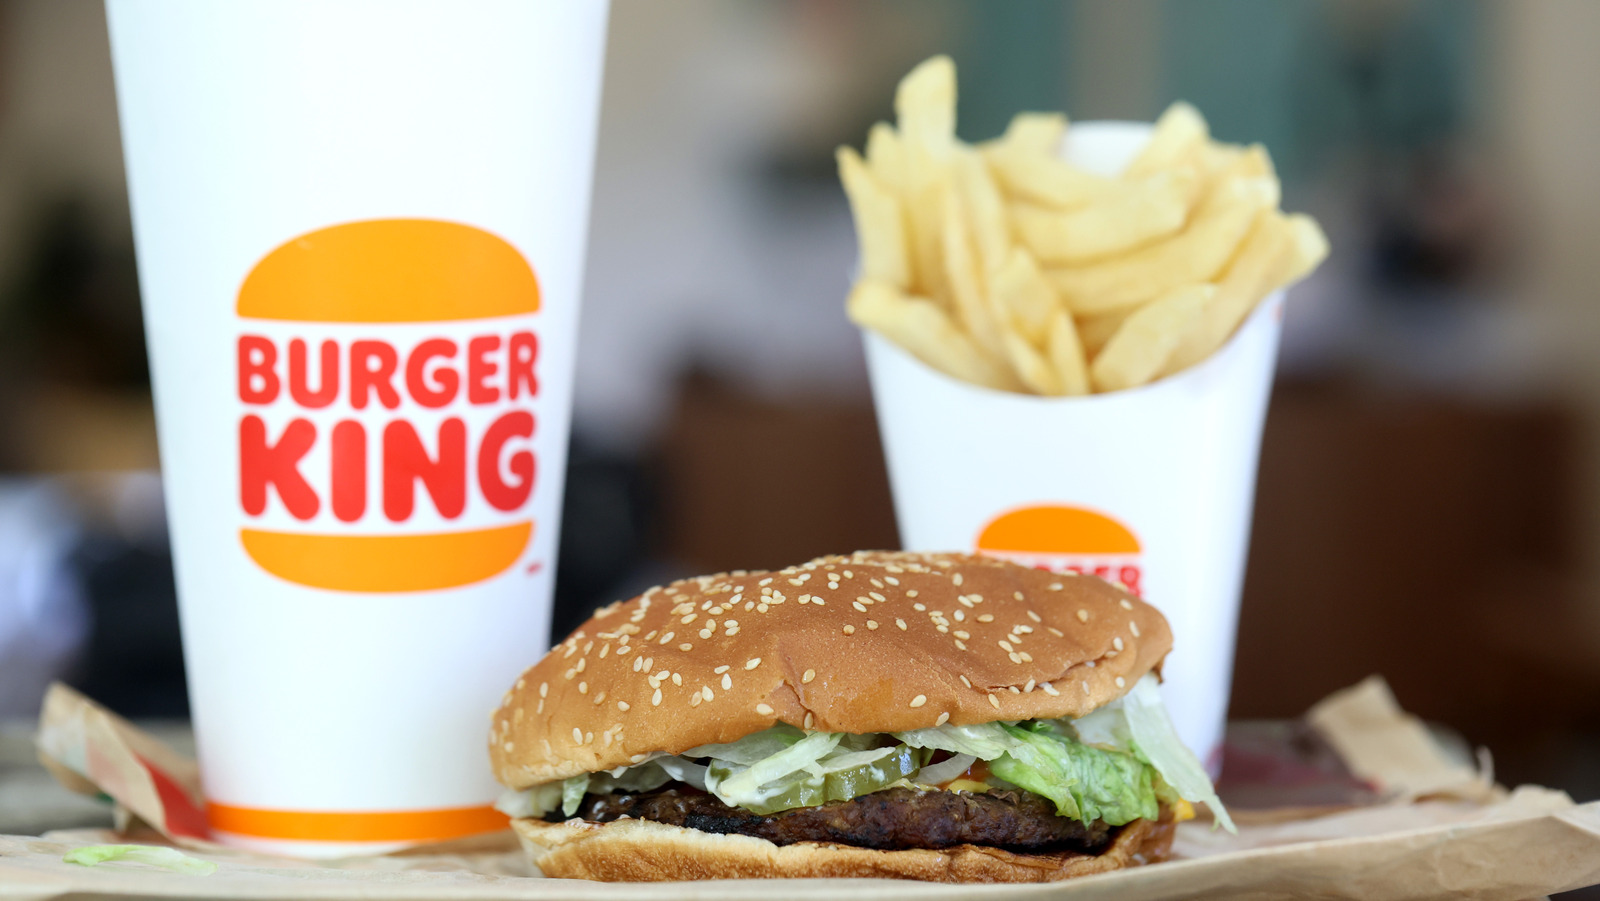 What Time Does Burger King Start Serving Lunch?